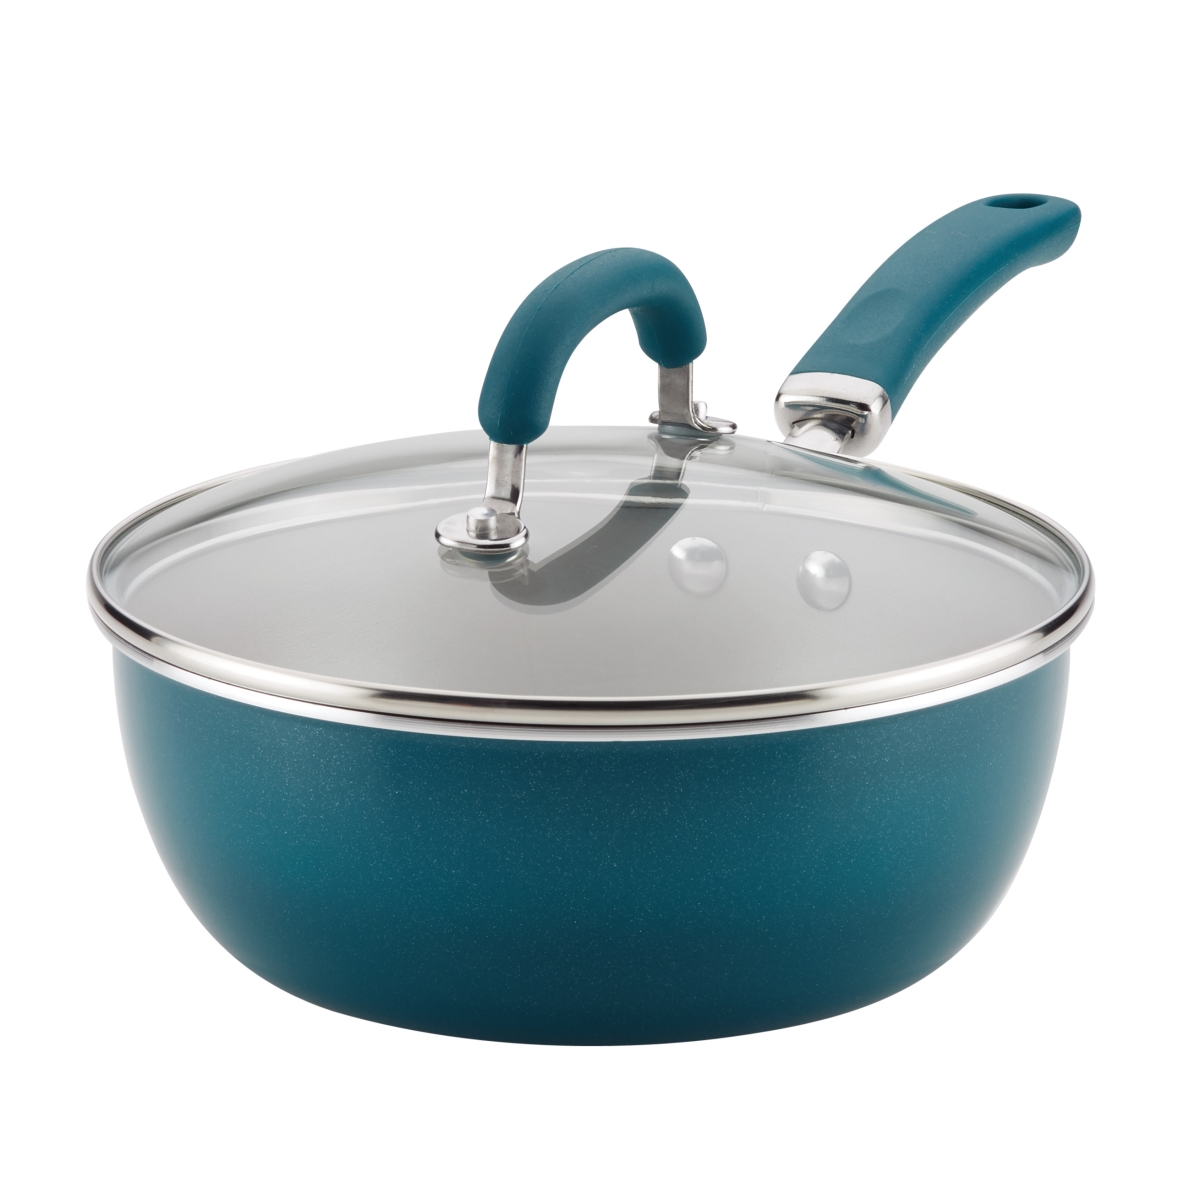 Picture of Rachael Ray 12160 3 qt. Create Delicious Aluminum Nonstick Everything Pan - Teal Shimmer